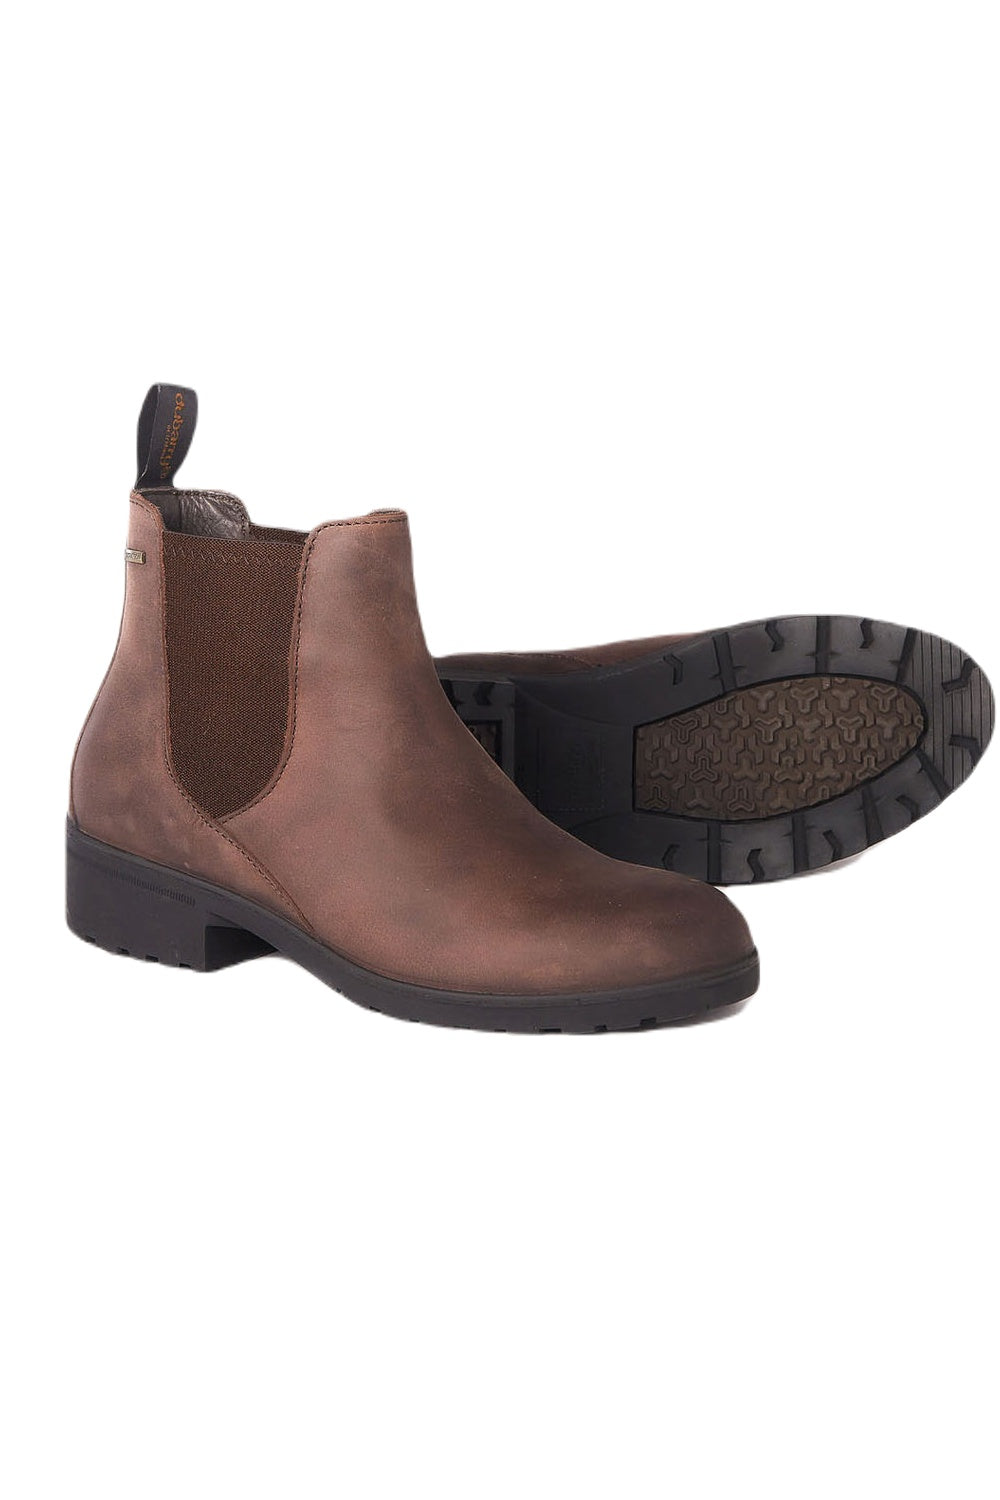 Dubarry Womens Waterford Chelsea Boots in Old Rum 